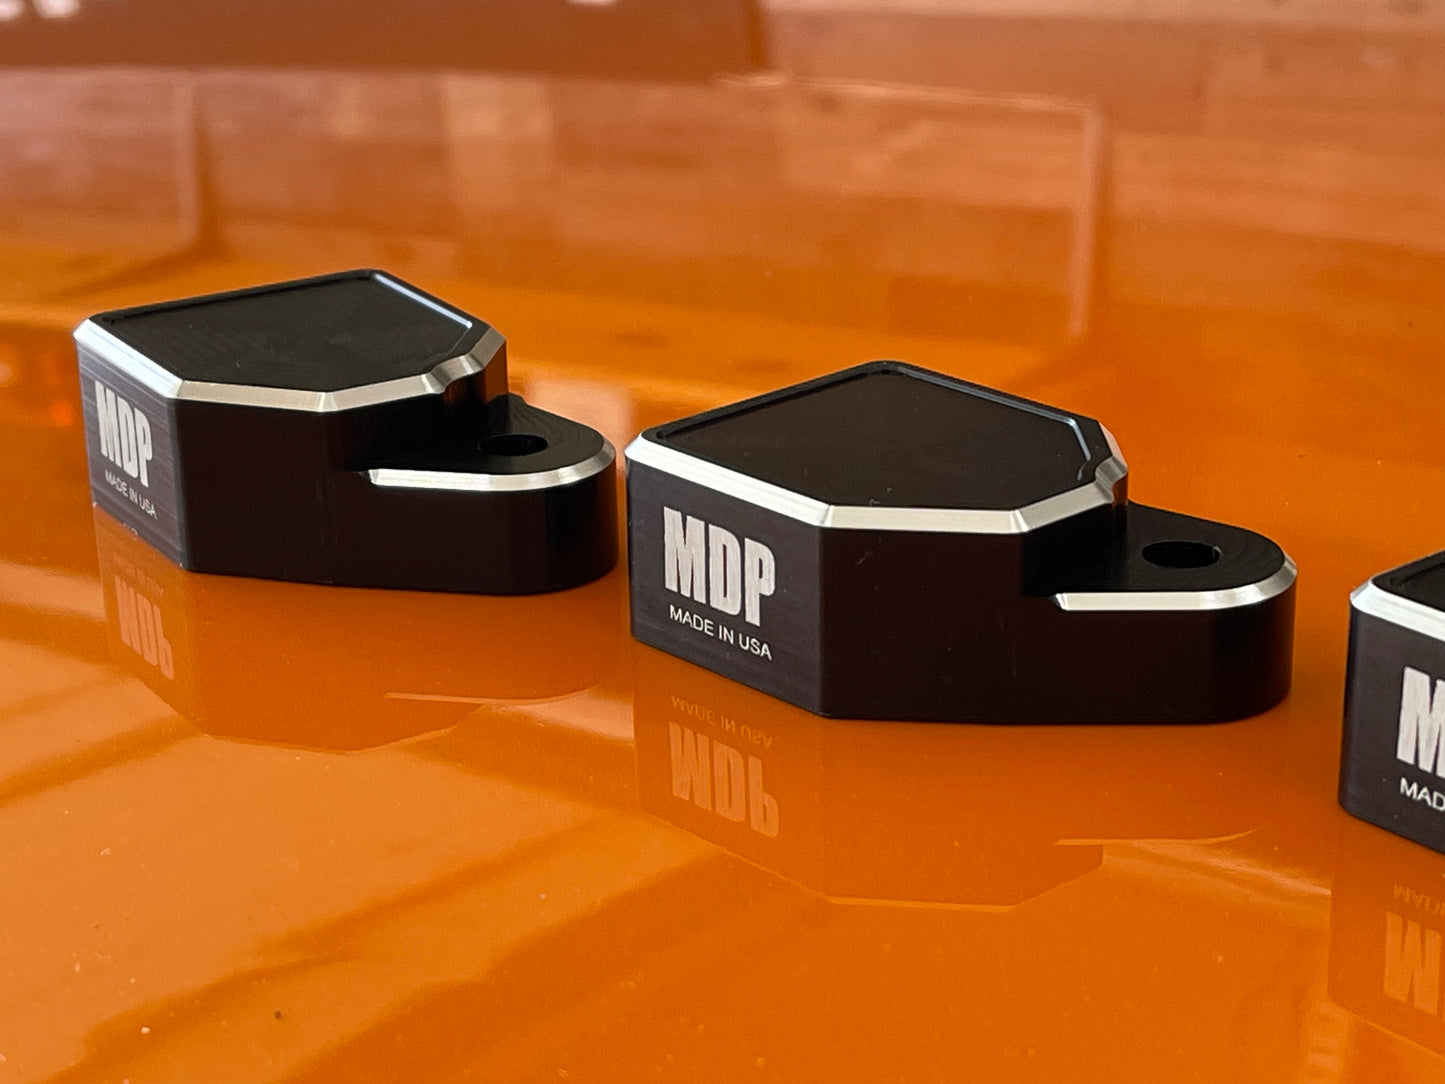 MDP BLACK Coil Covers